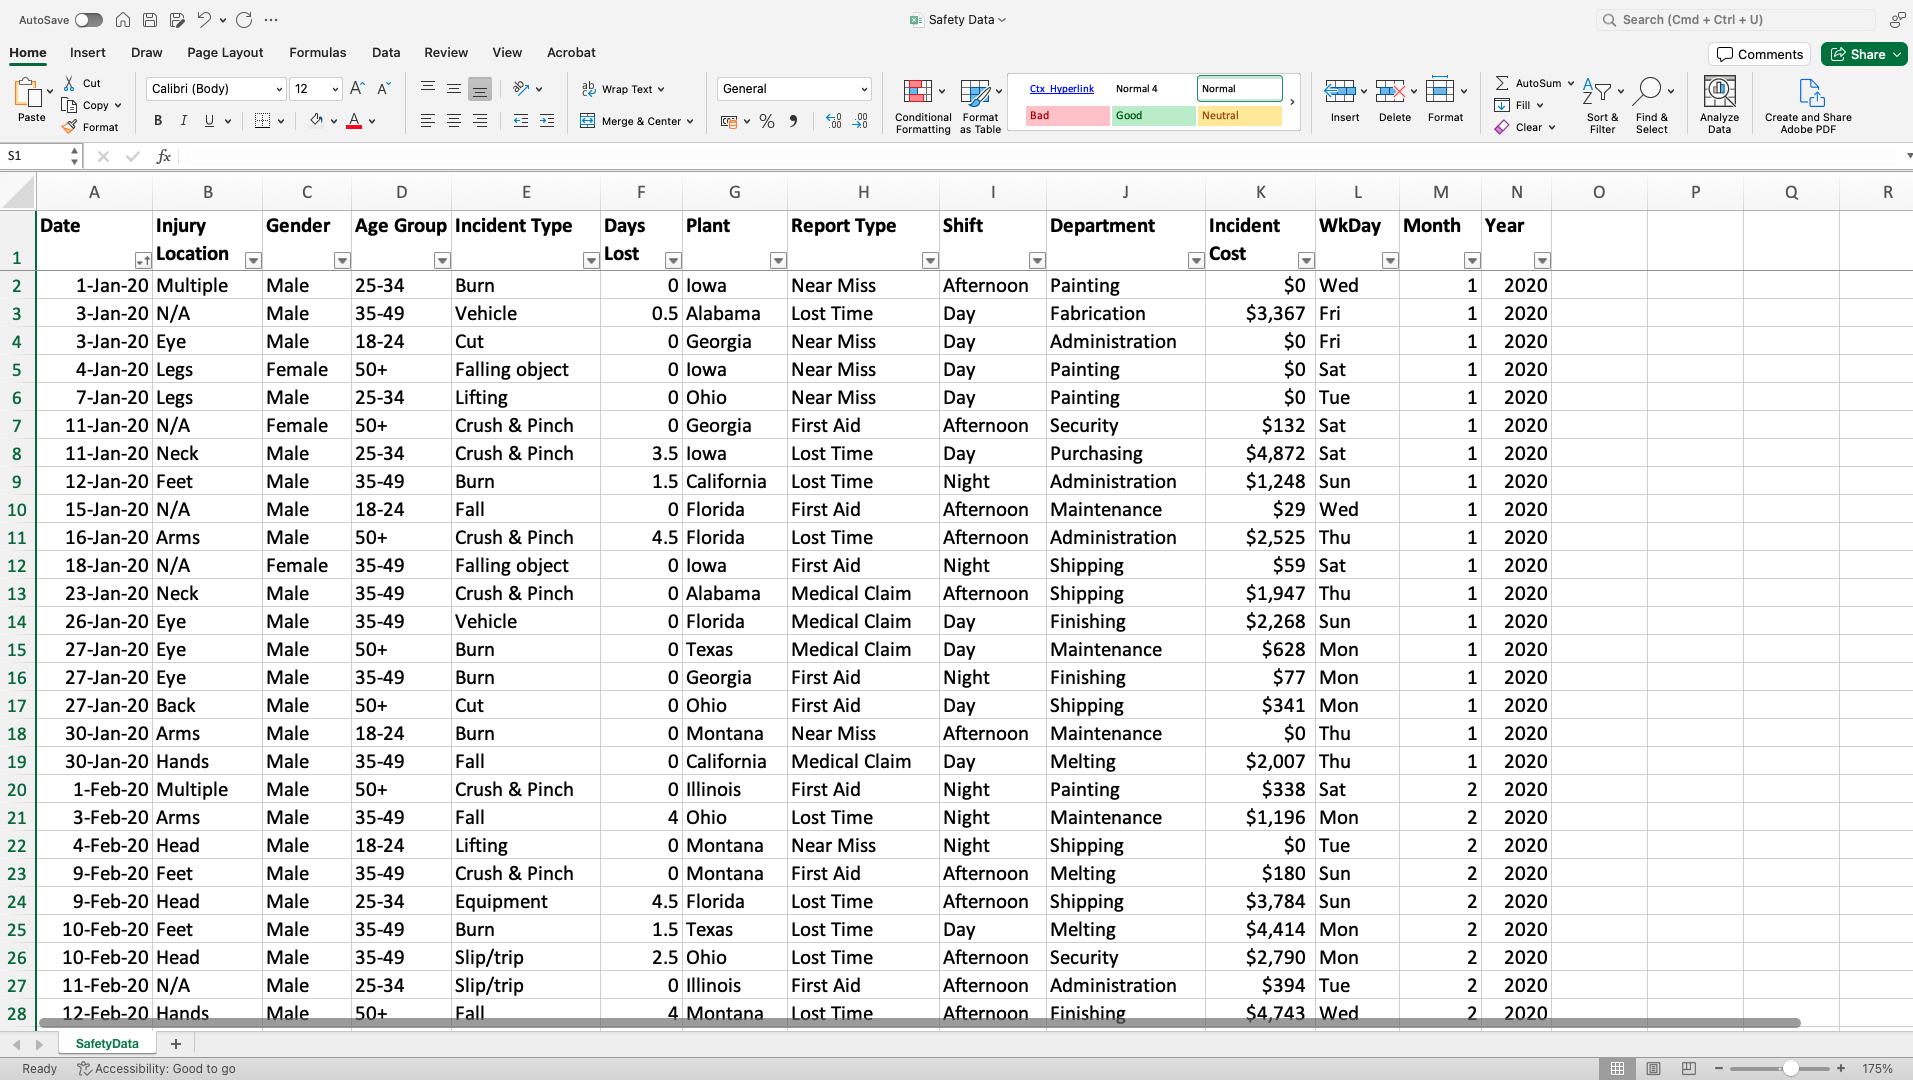 Worksheet screenshot for the blog article "How To Create a Pivot Table in Excel"